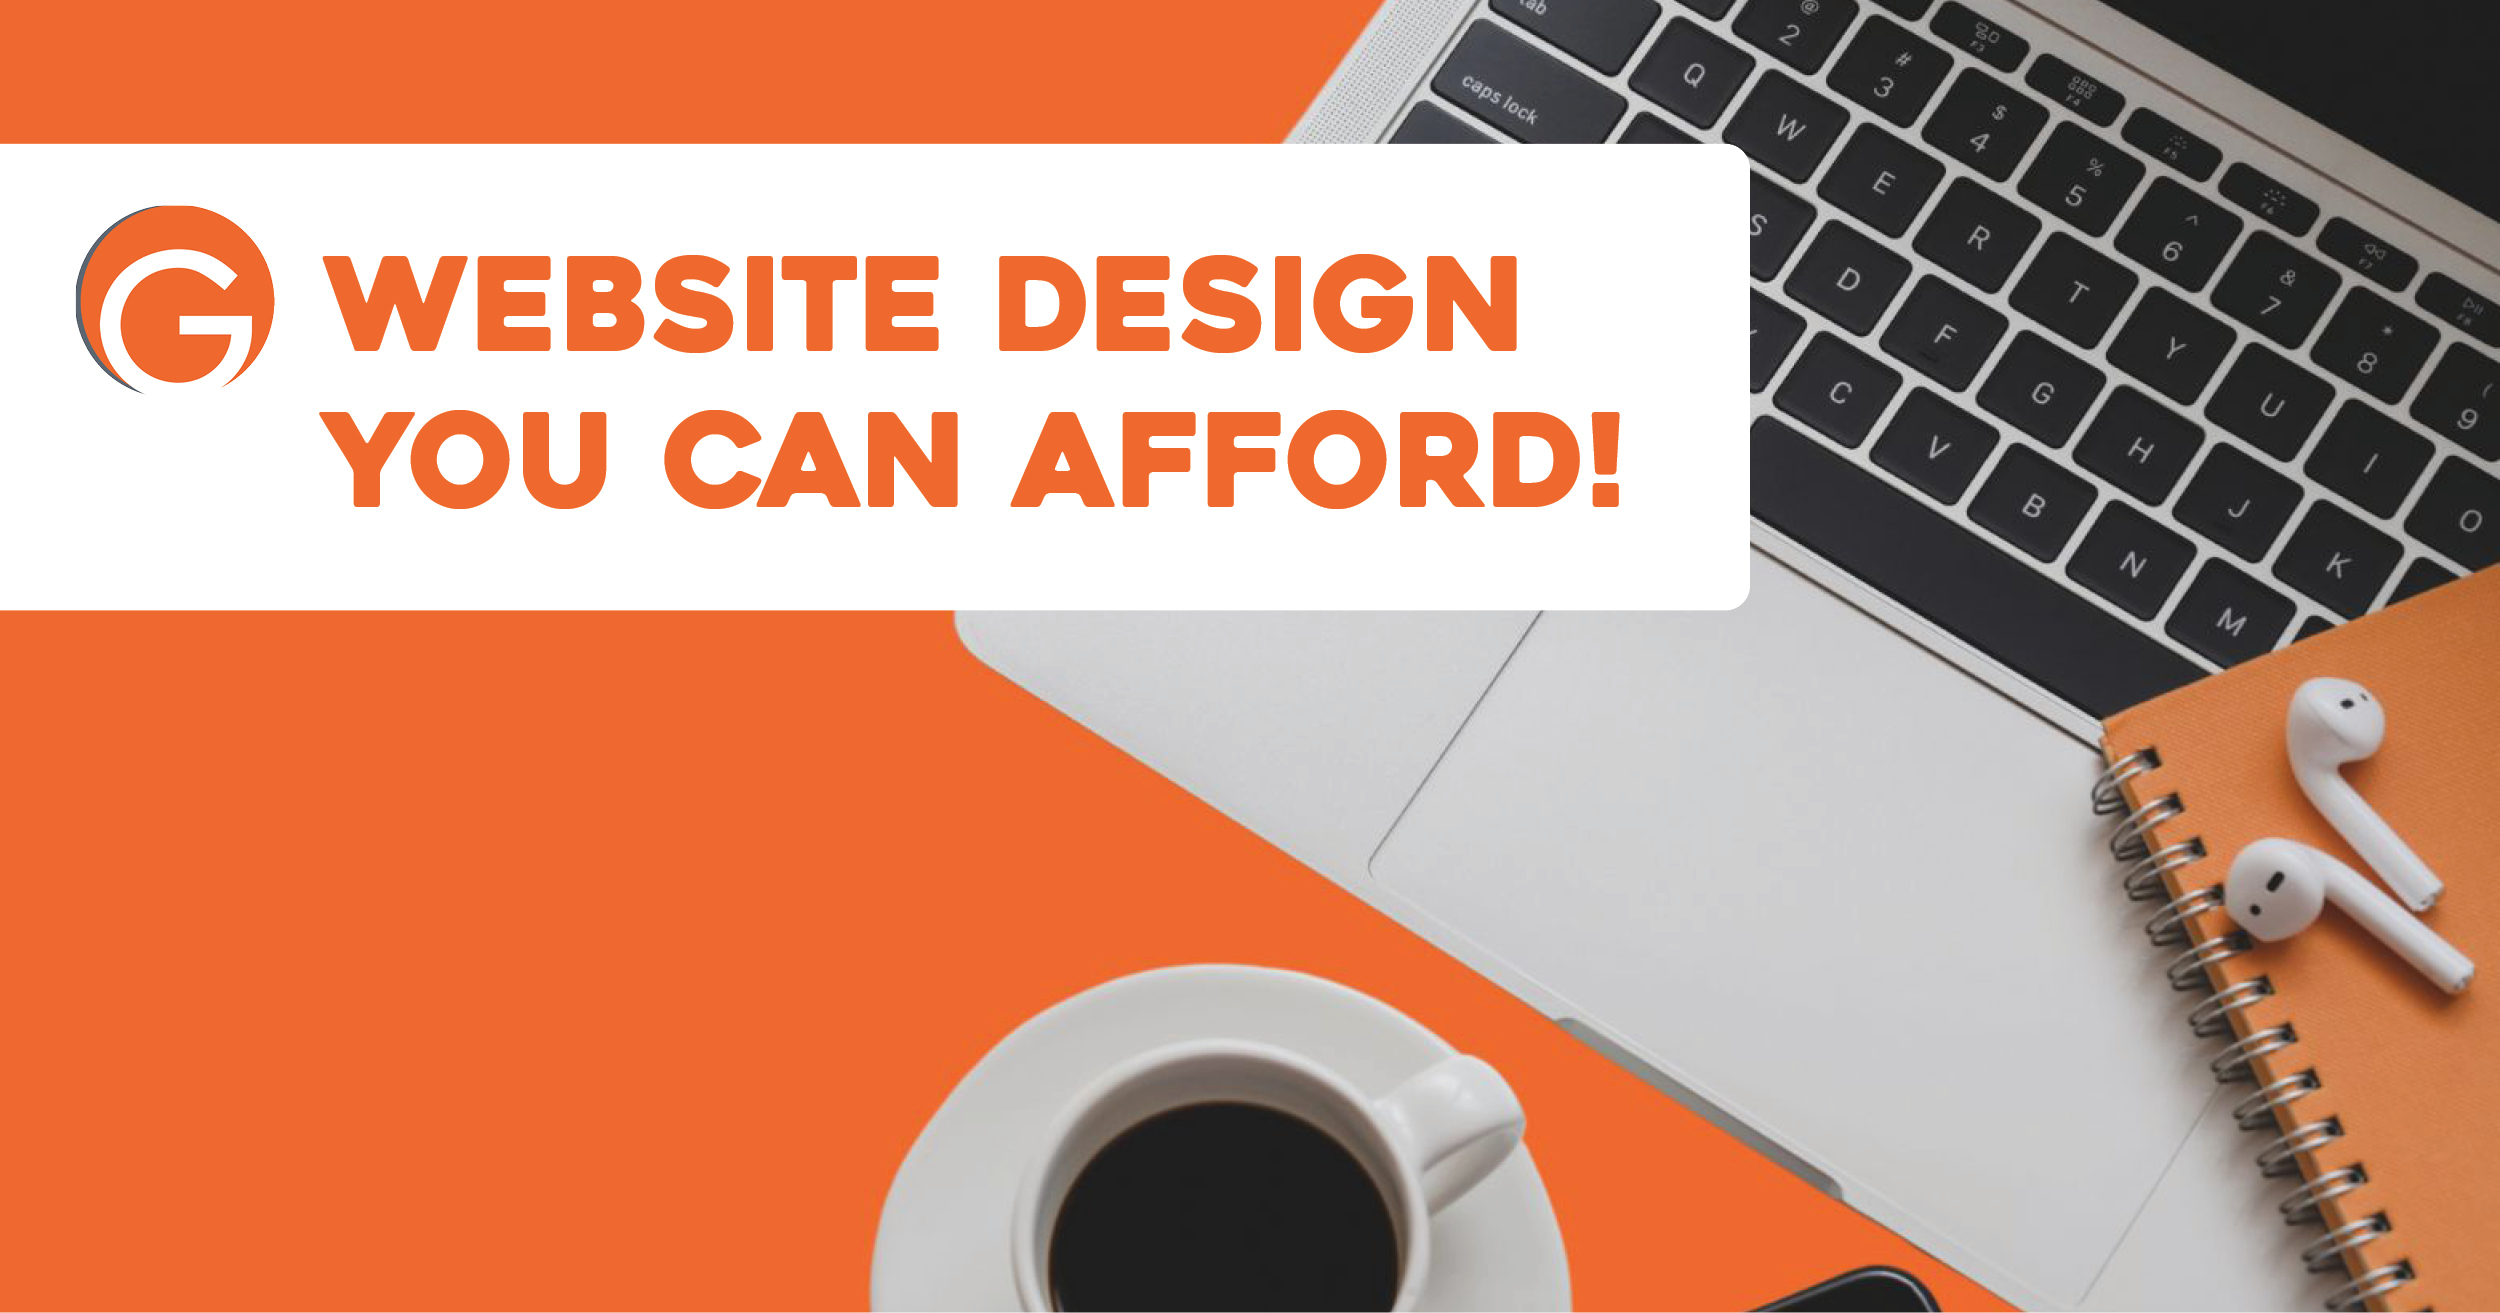 Professional website design and development you can afford!